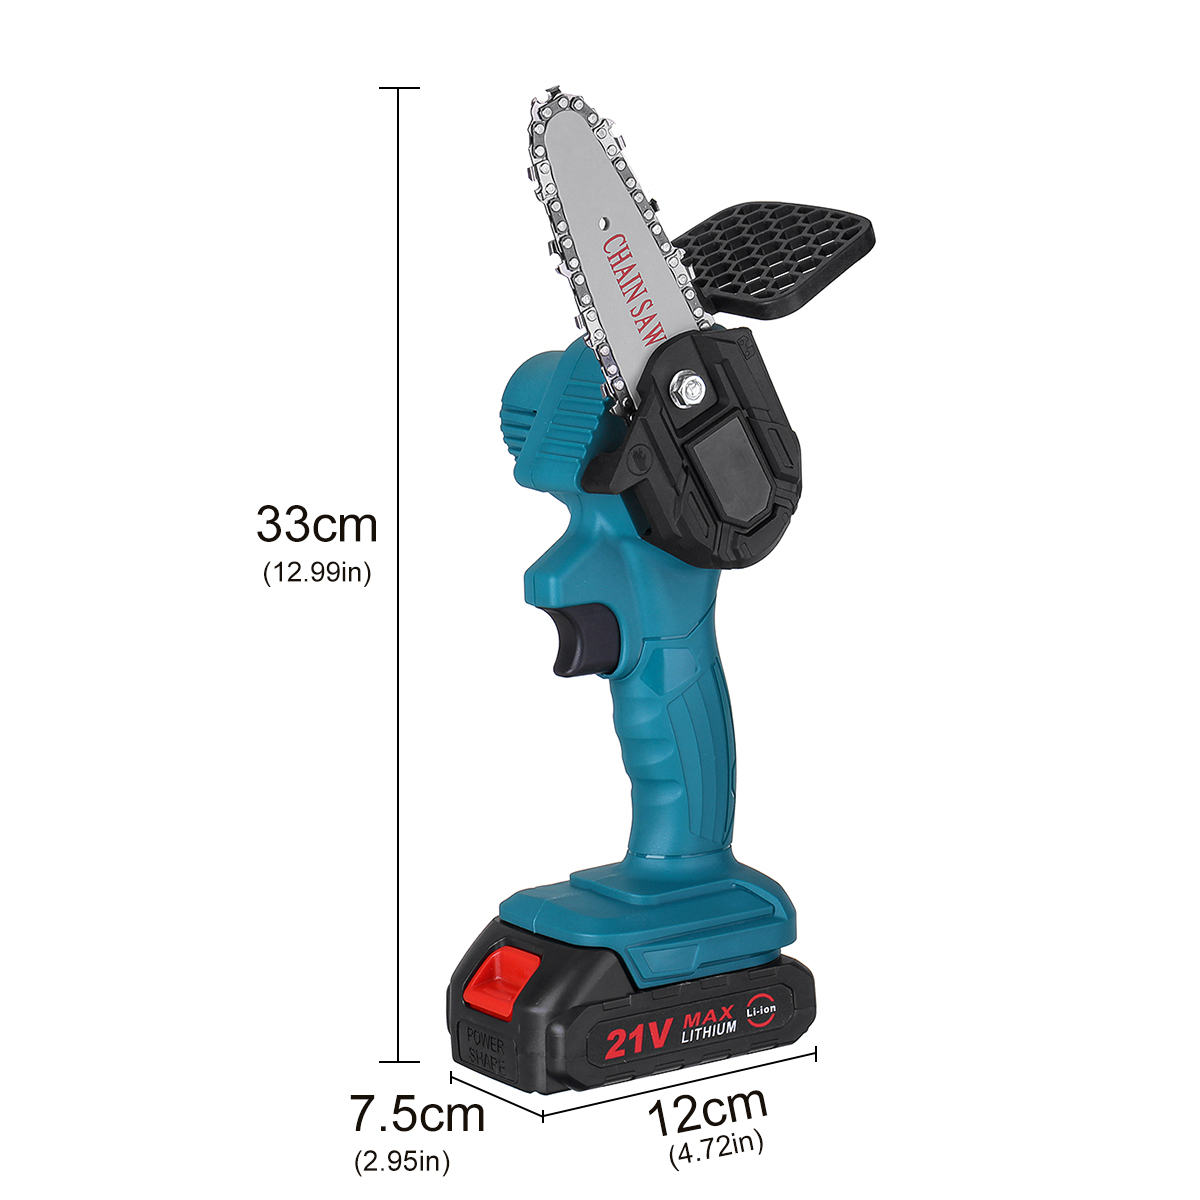 4-Inch-21V-Cordless-Electric-Chain-Saw-W-01pc2pcs-Batteries-For-Tree-Branch-Wood-Cutting-Tool-1805148-10